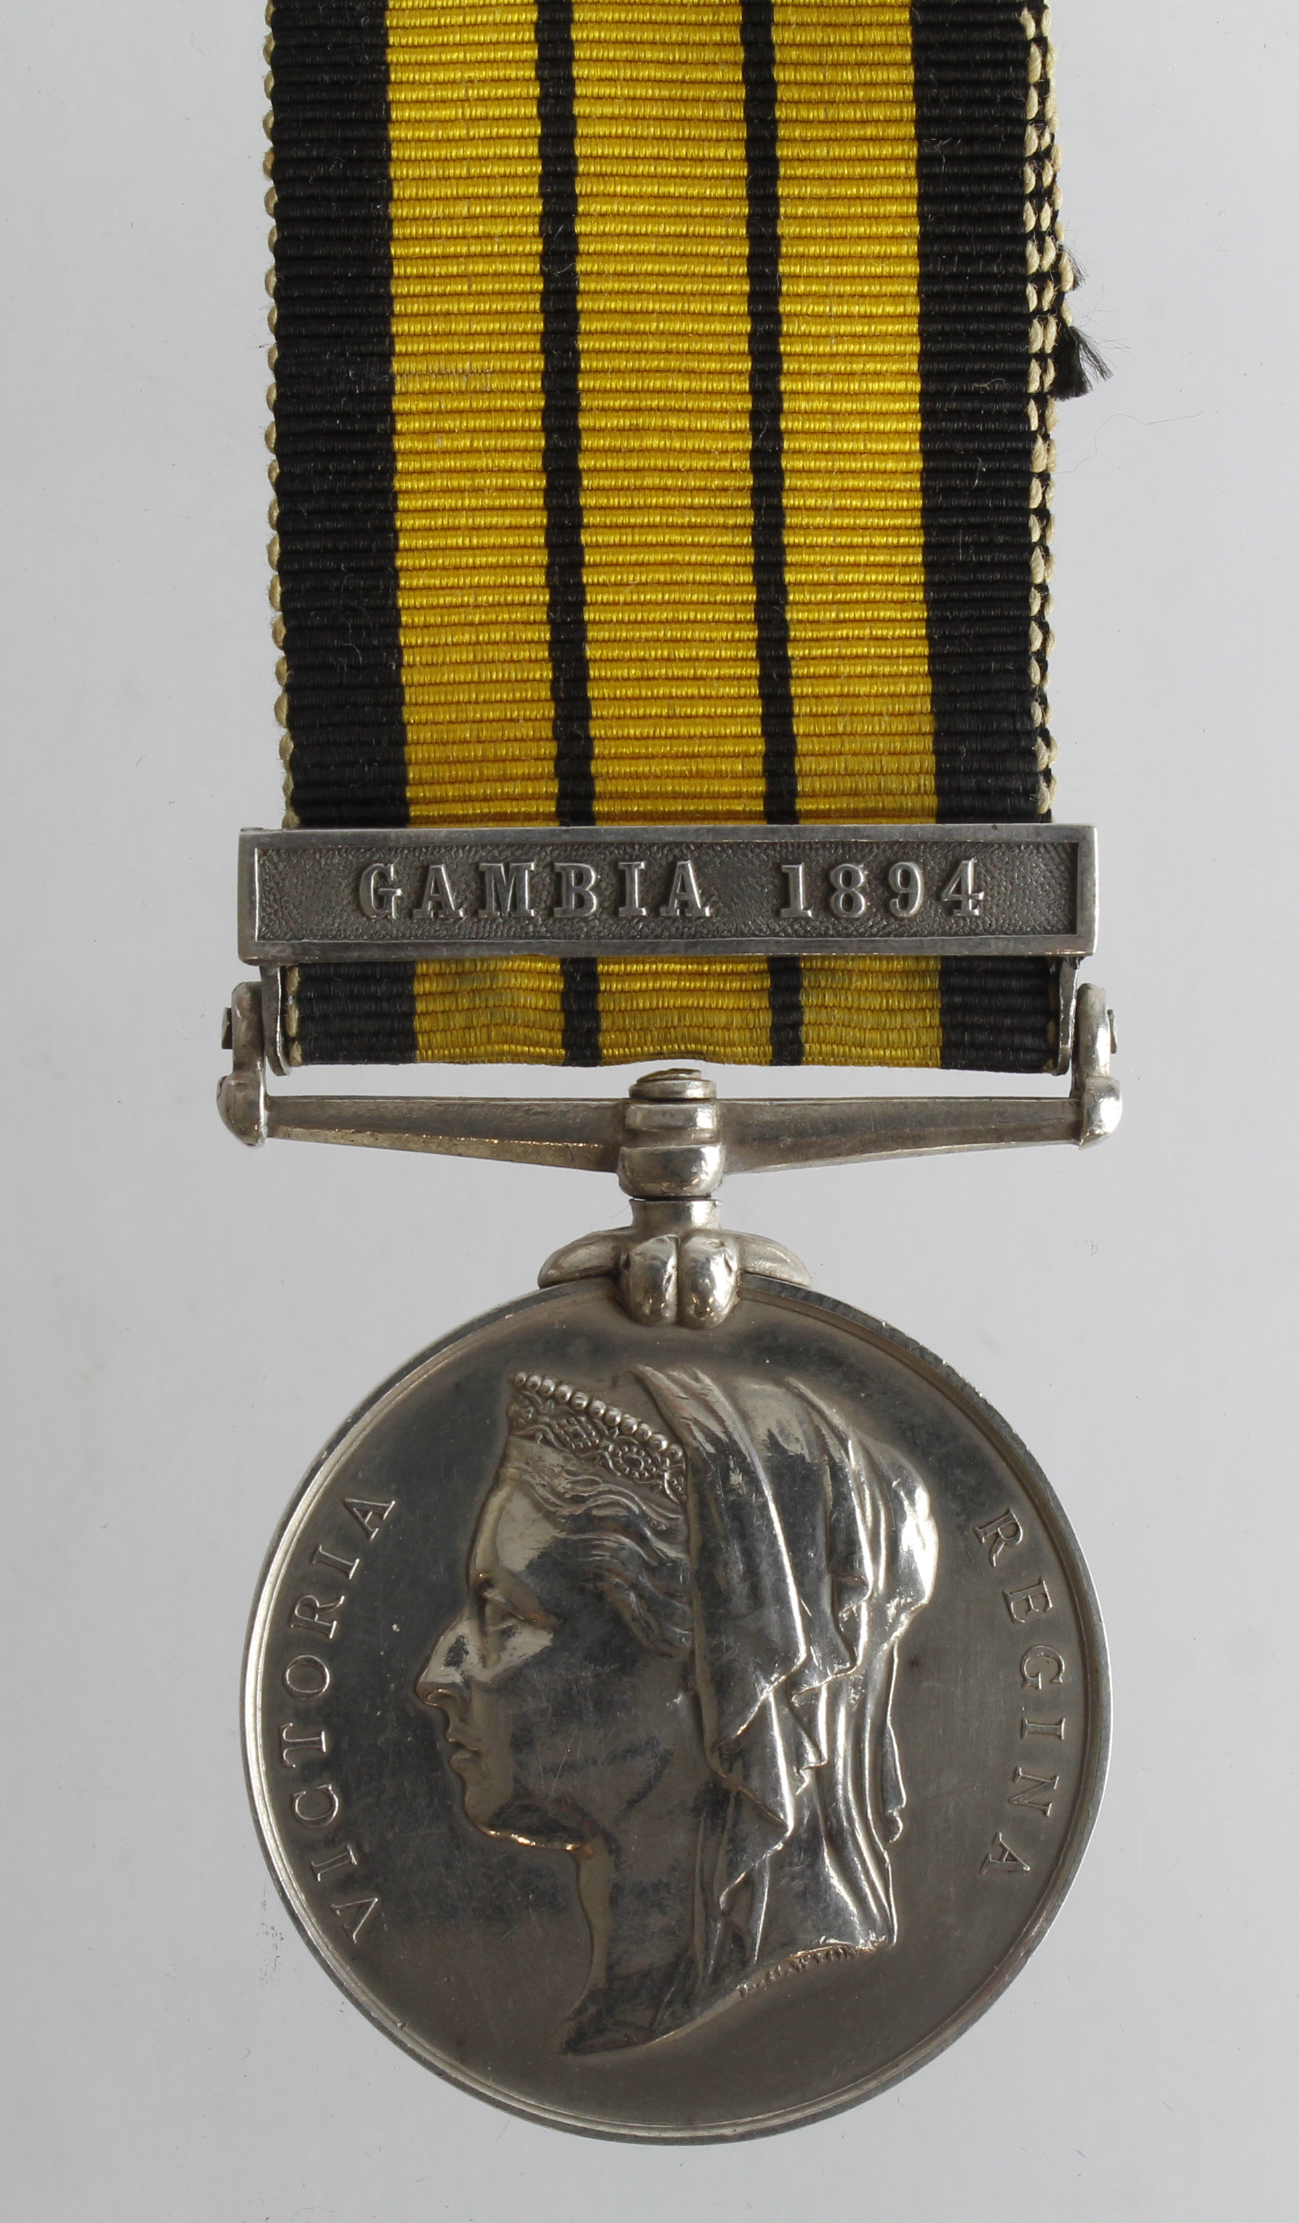 East and West Africa Medal 1892 with Gambia 1894 clasp, neatly erased. Sold as seen